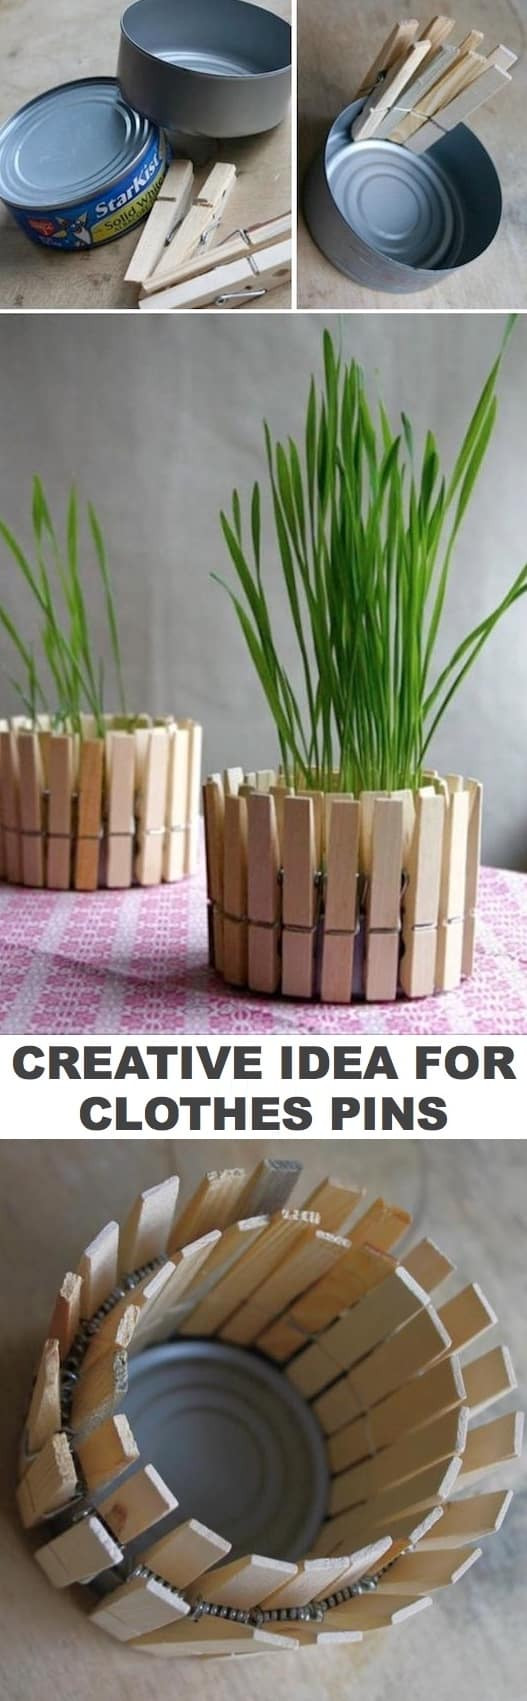 Simple Crafts For Adults
 Easy DIY Craft Ideas That Will Spark Your Creativity for